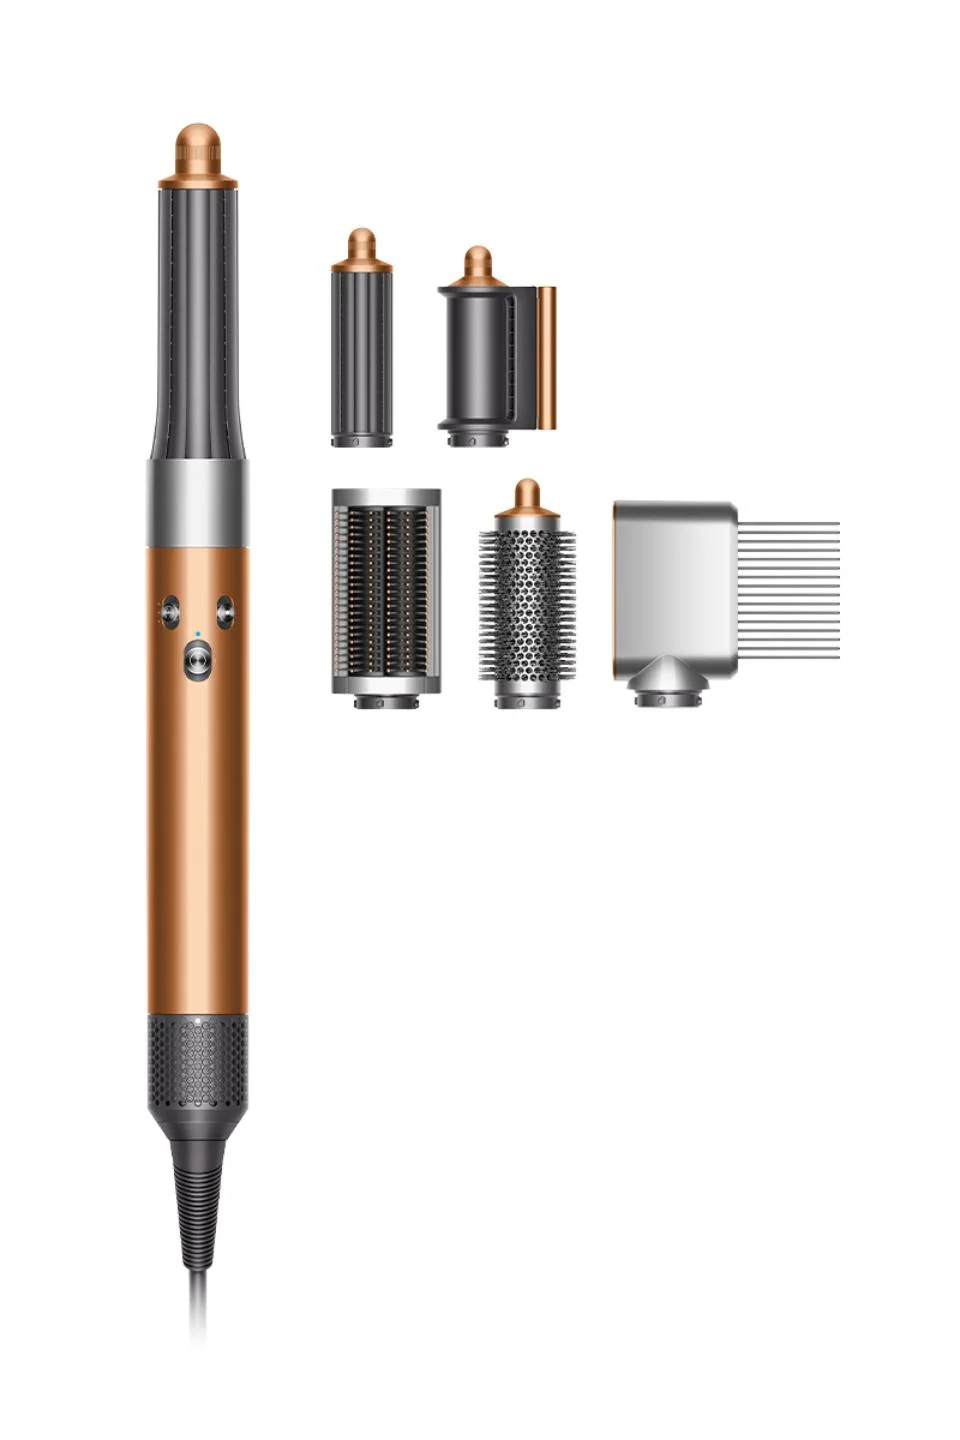 Dyson's New Airwrap Diffuse Is a Multi-Styler for Curly & Coily Hair